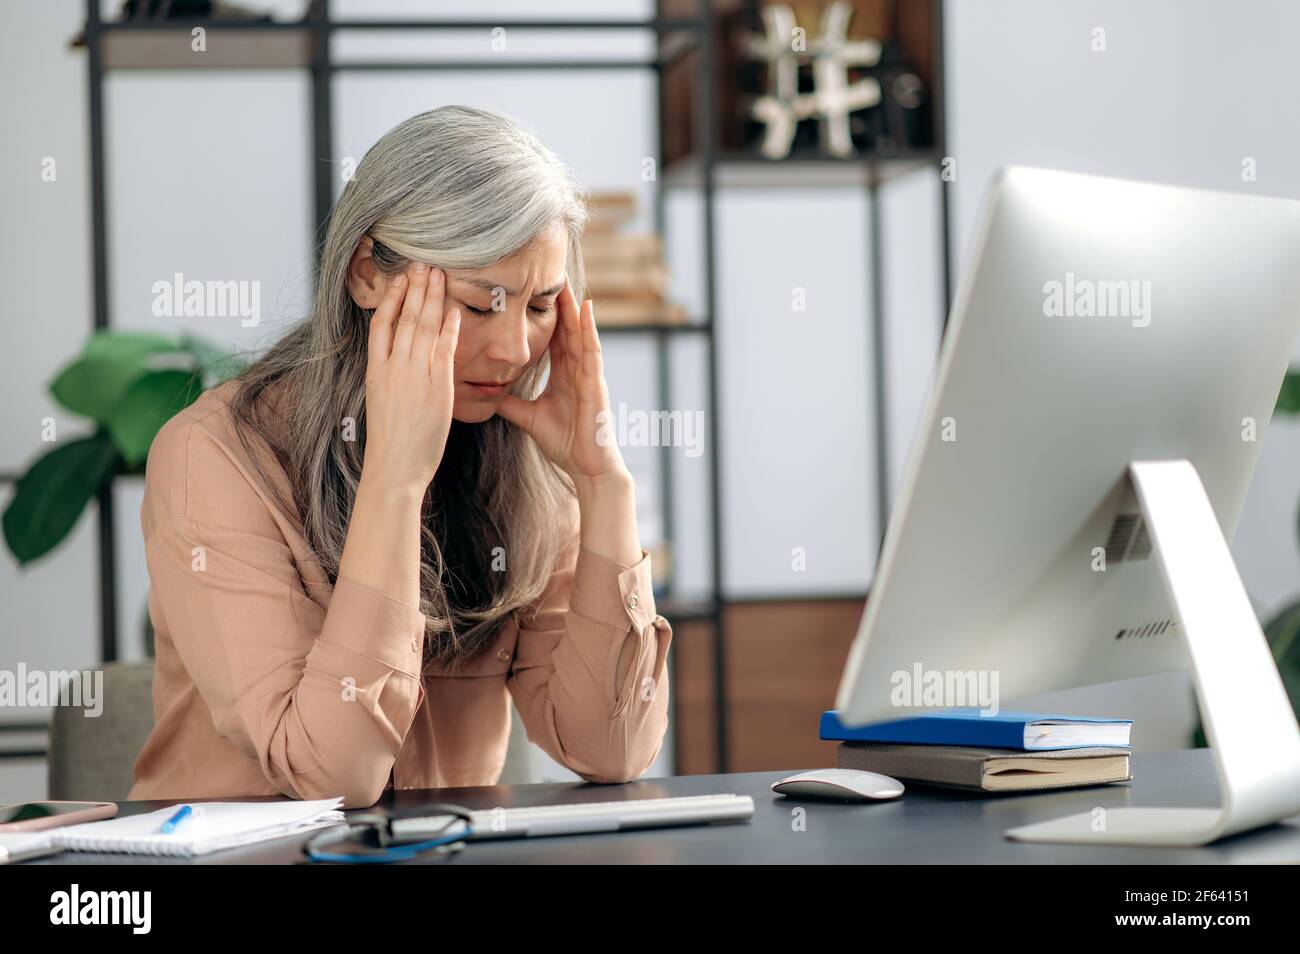 Concentrated tense senior gray-haired asian woman, manager, business lady, ceo, thinking about a project or deal, massaging her head with her hands, she has a headache, sitting at table, need rest Stock Photo